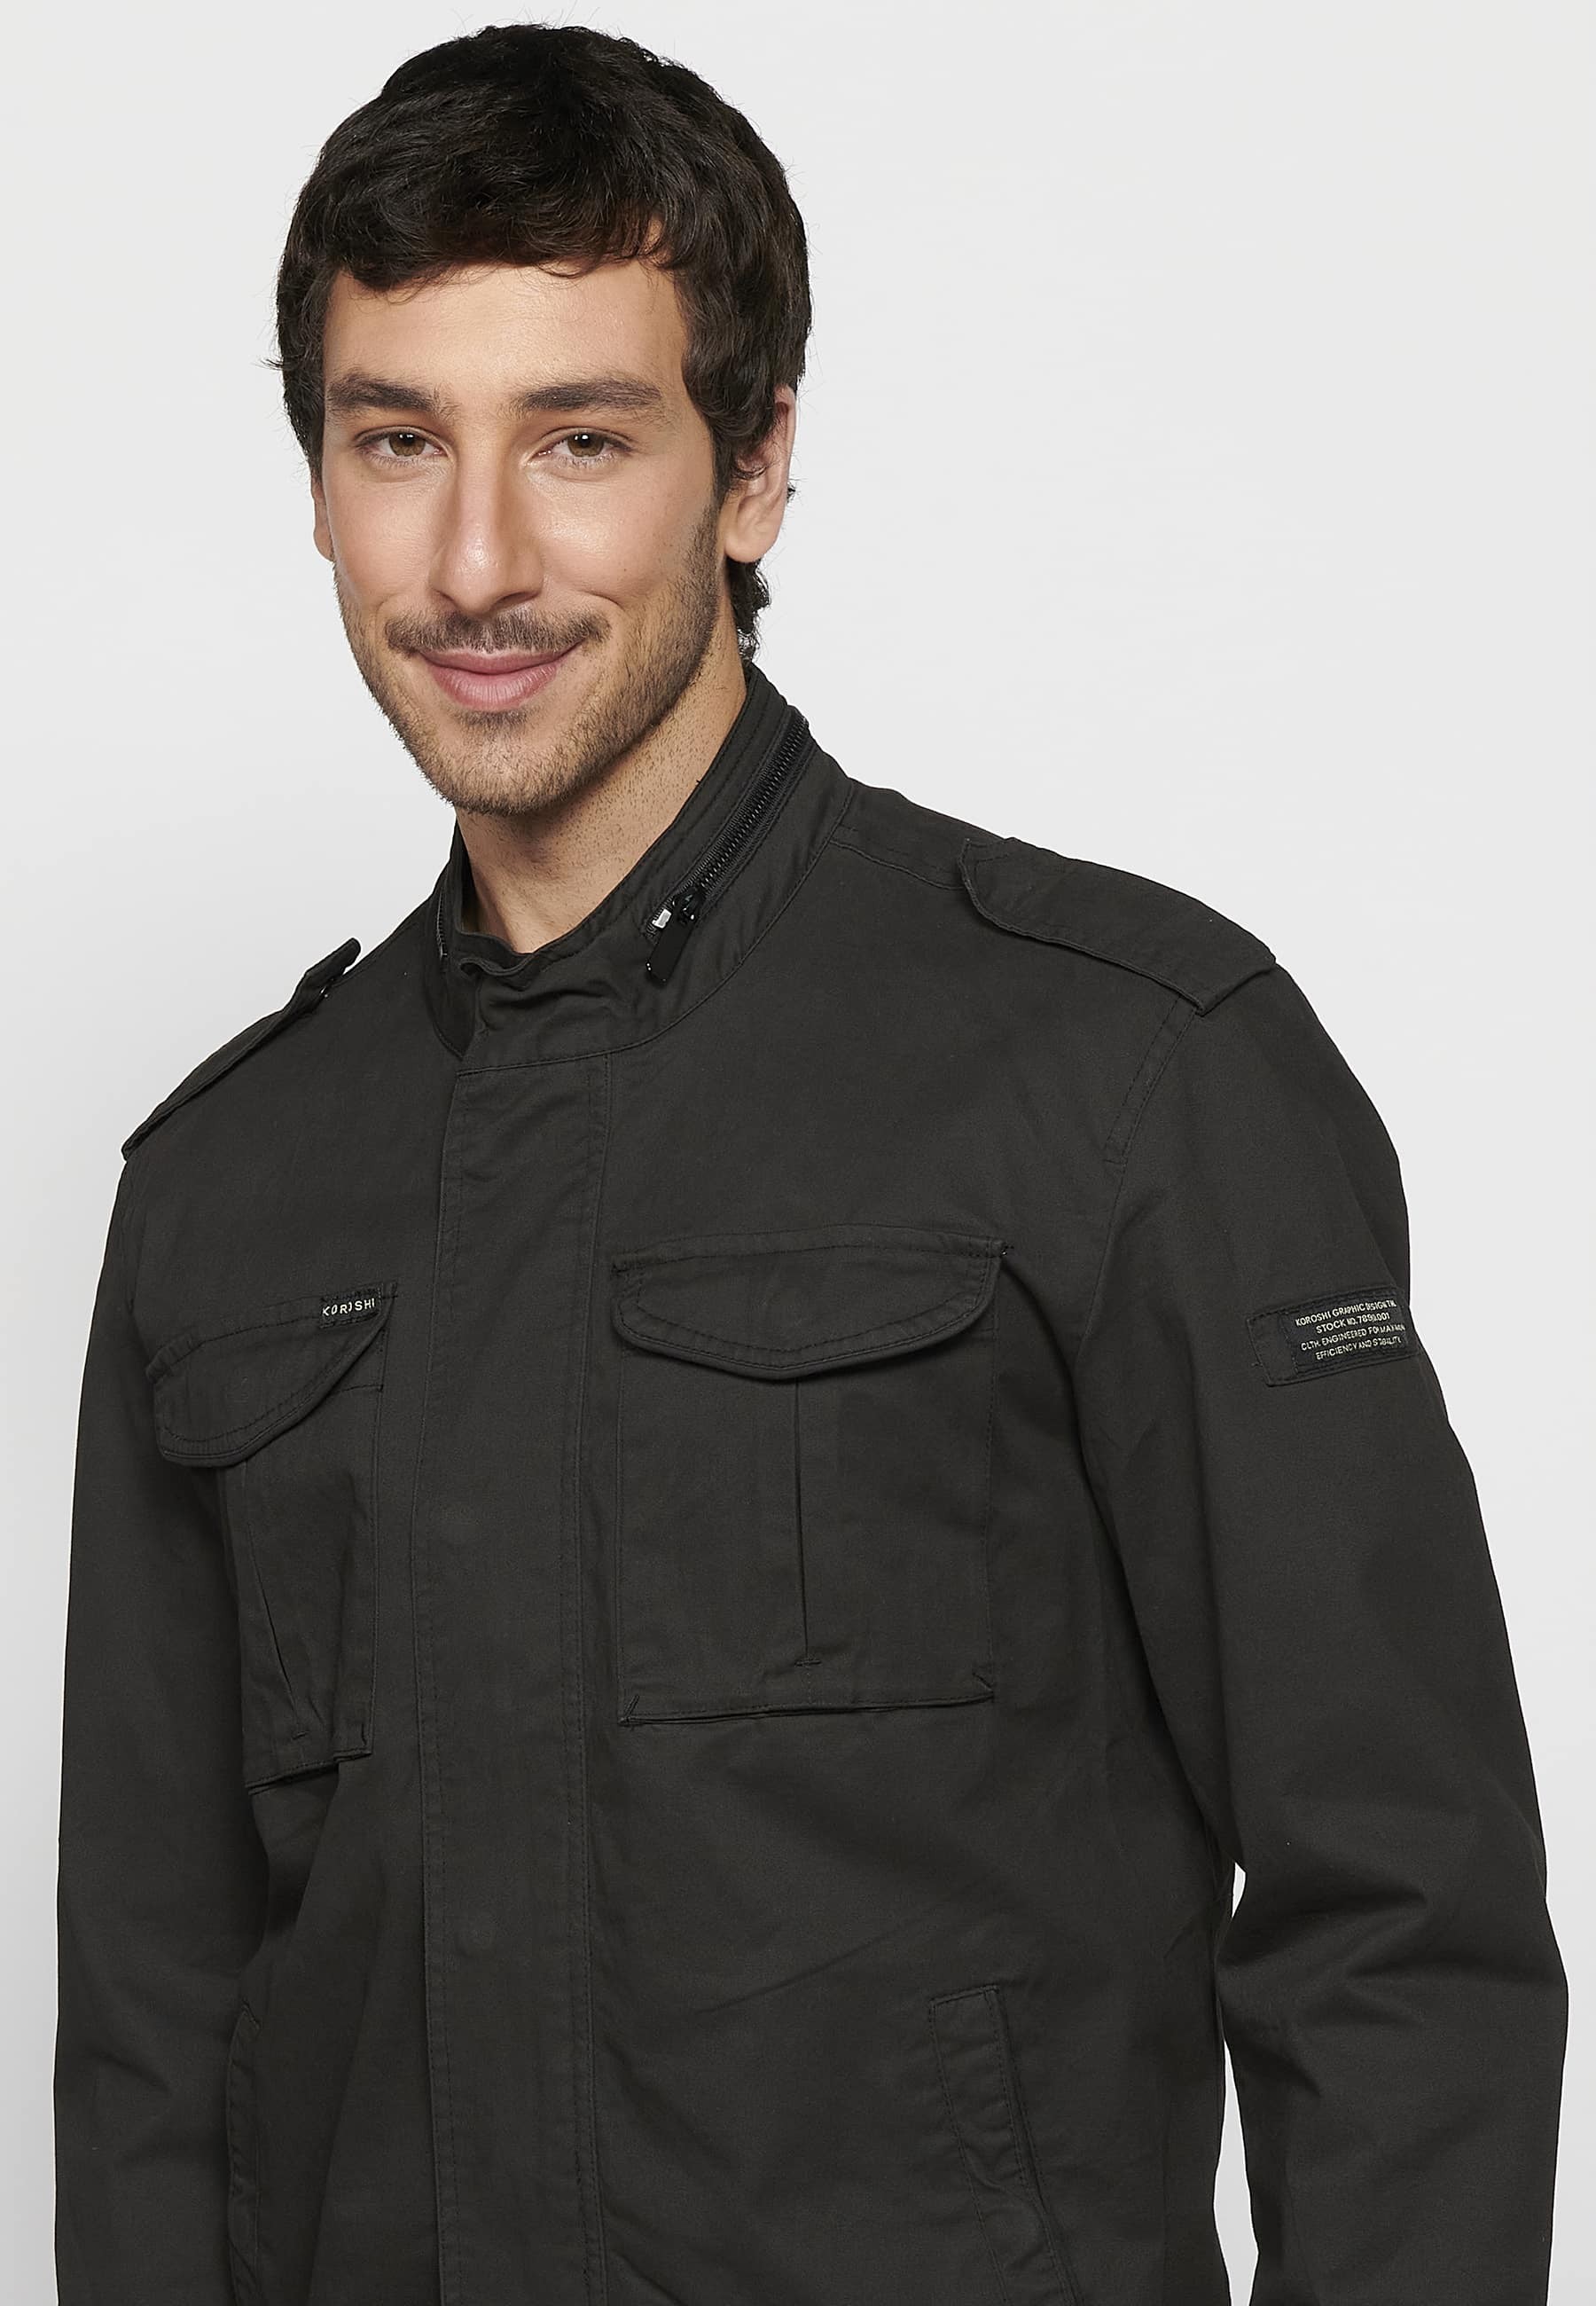 Long-sleeved jacket with high collar and front zipper closure with pockets in black for men. 1